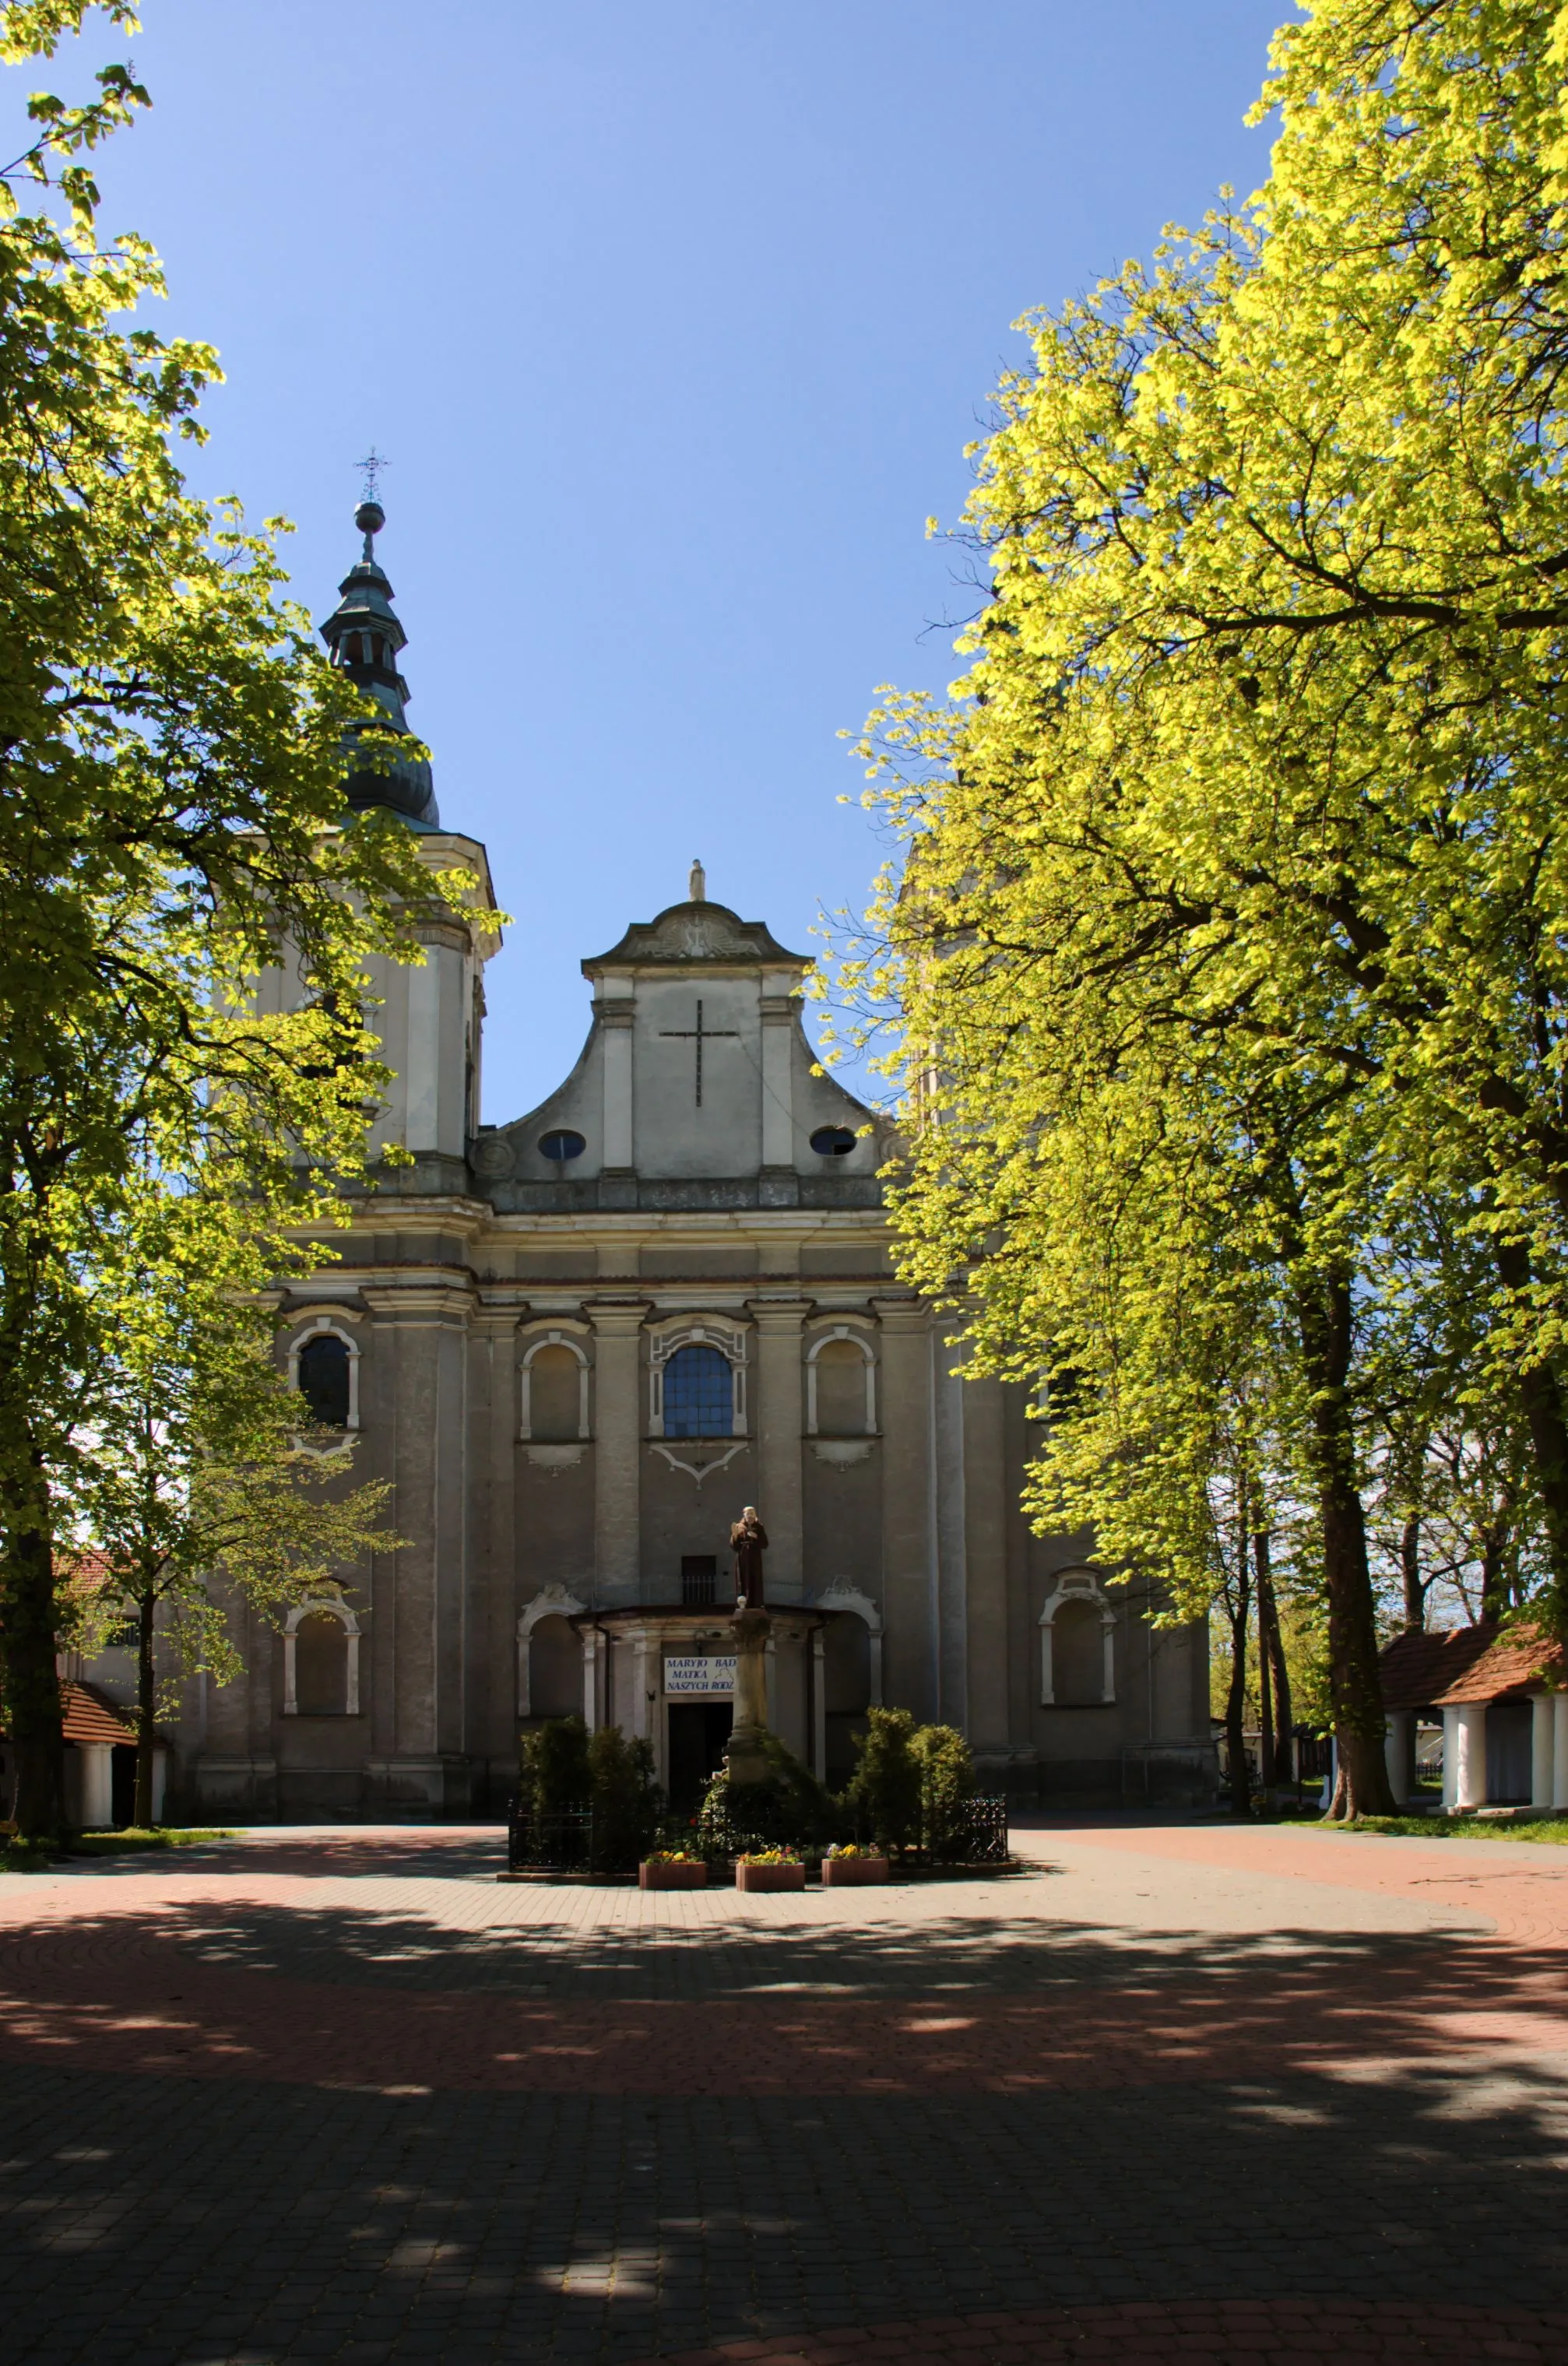 Photo showing: Front view of Transfiguration of the Lord's church in Paradyż, Poland